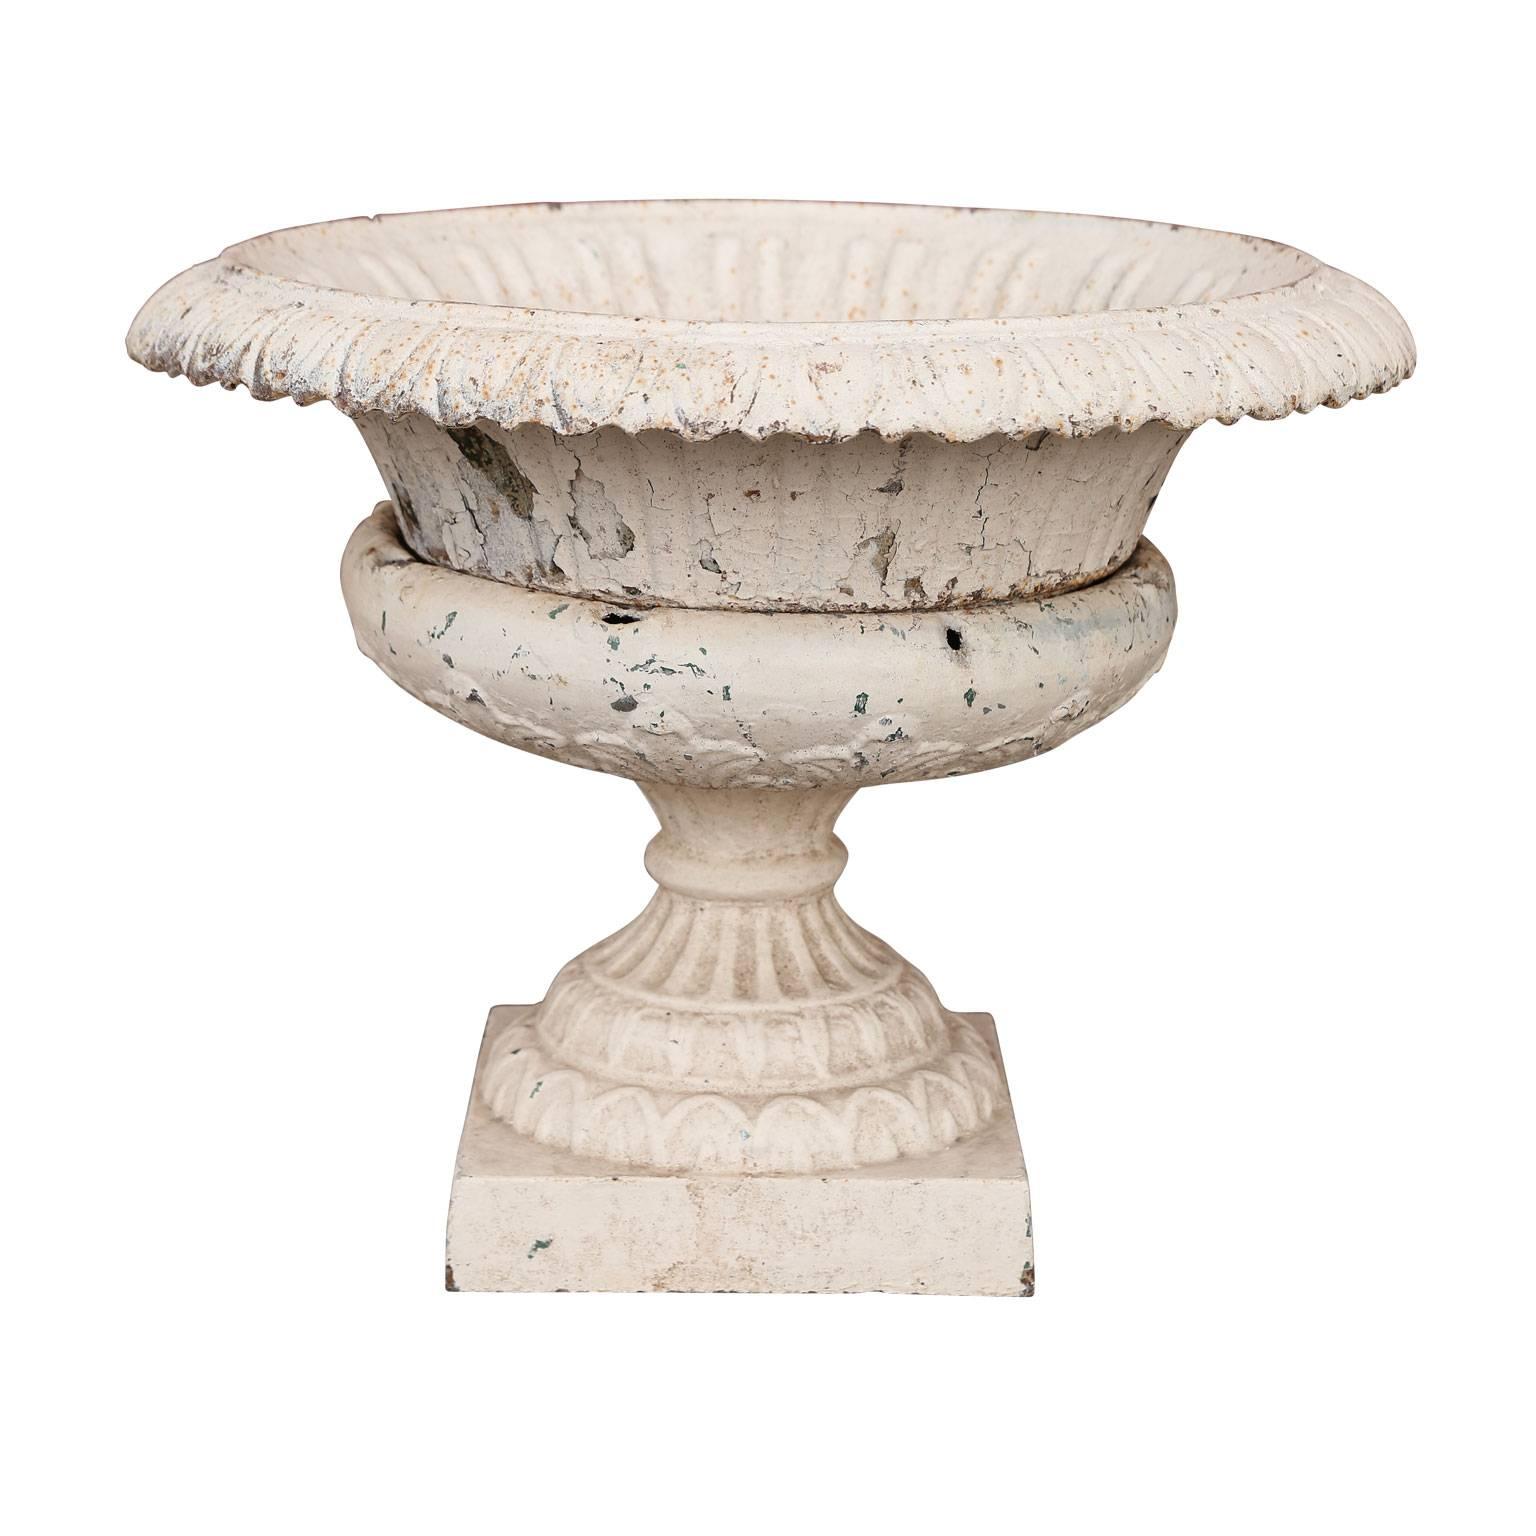 Pair of French cast iron garden urns. Dated to the late 19th century and finished in old white paint. Each cast iron urn is comprised of three segments.

Note: Original/early finish on antique and vintage metal will include some, or all, of the